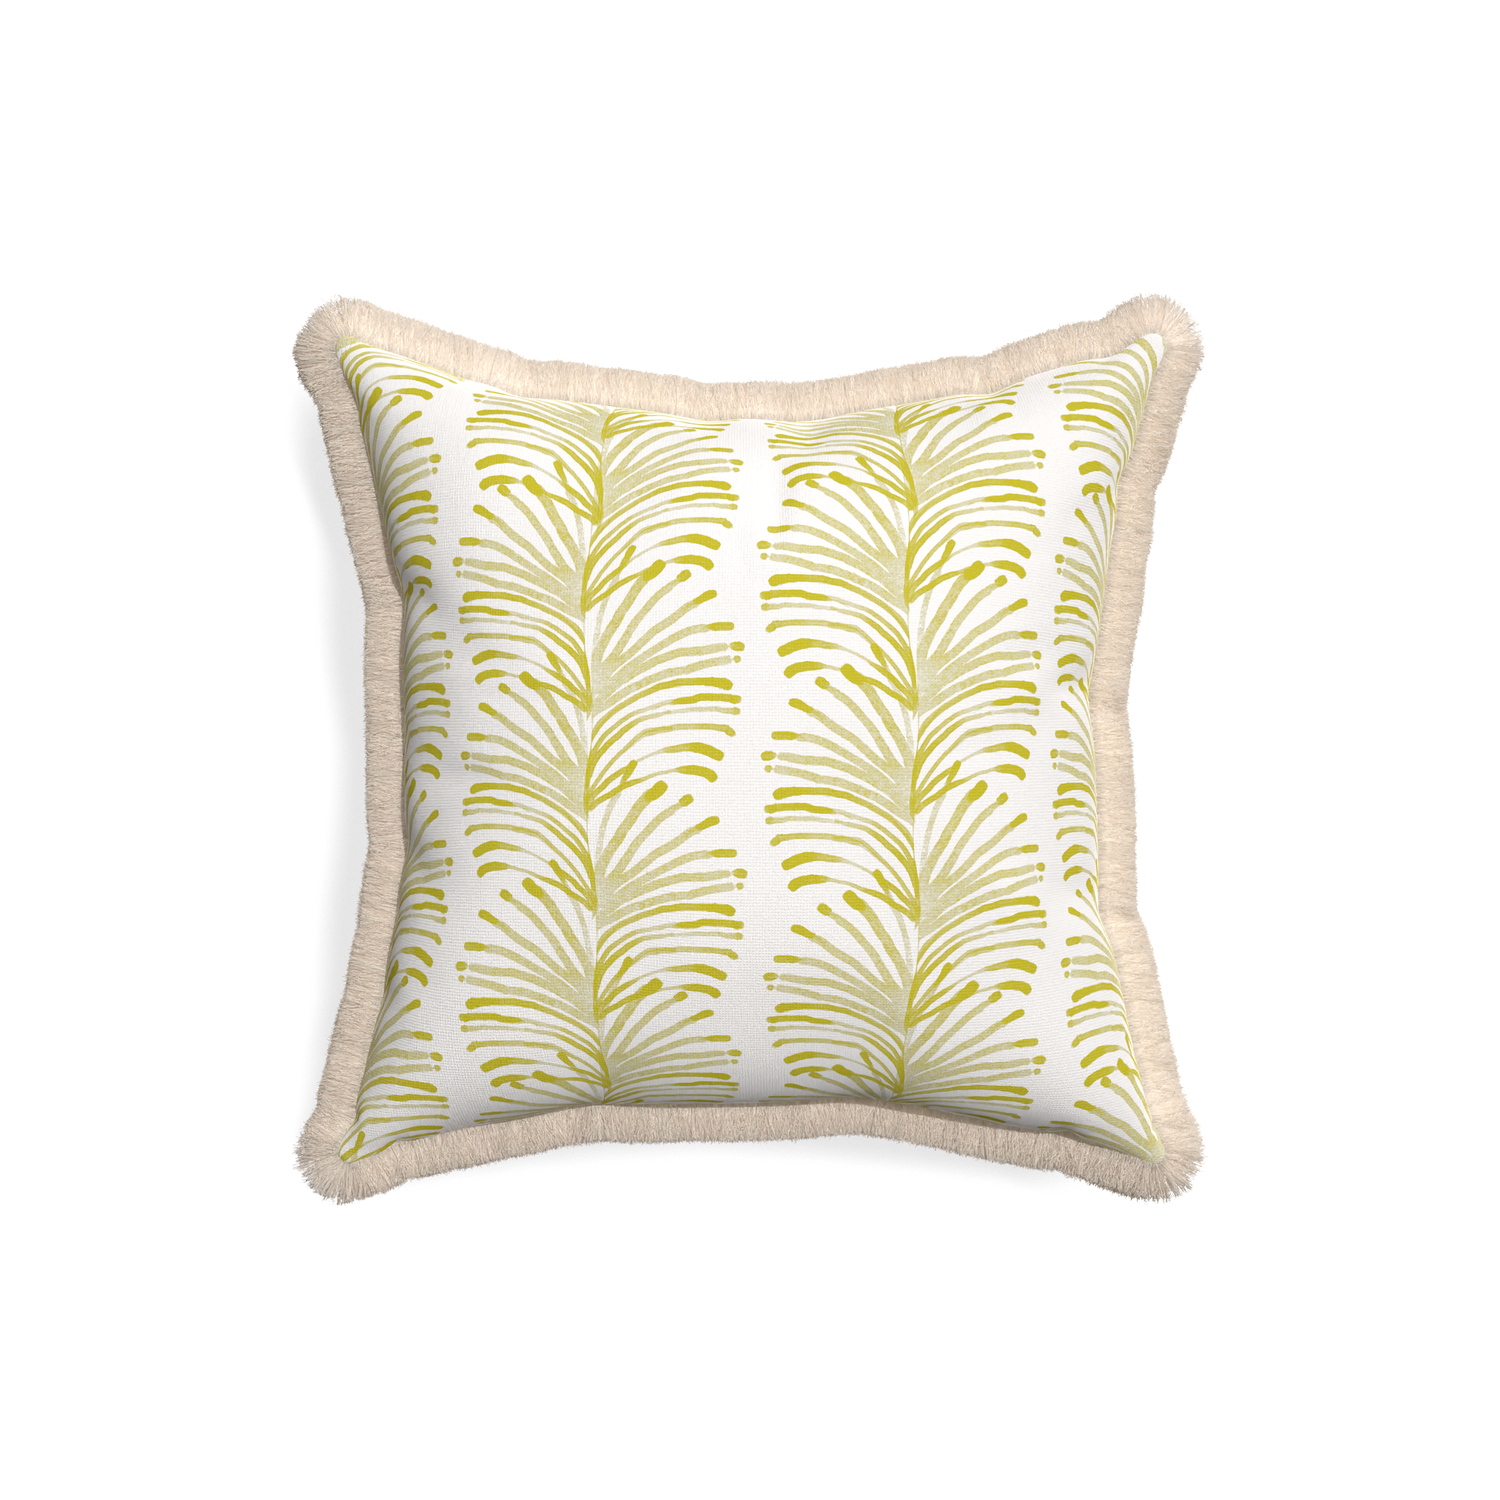 18-square emma chartreuse custom yellow stripe chartreusepillow with cream fringe on white background